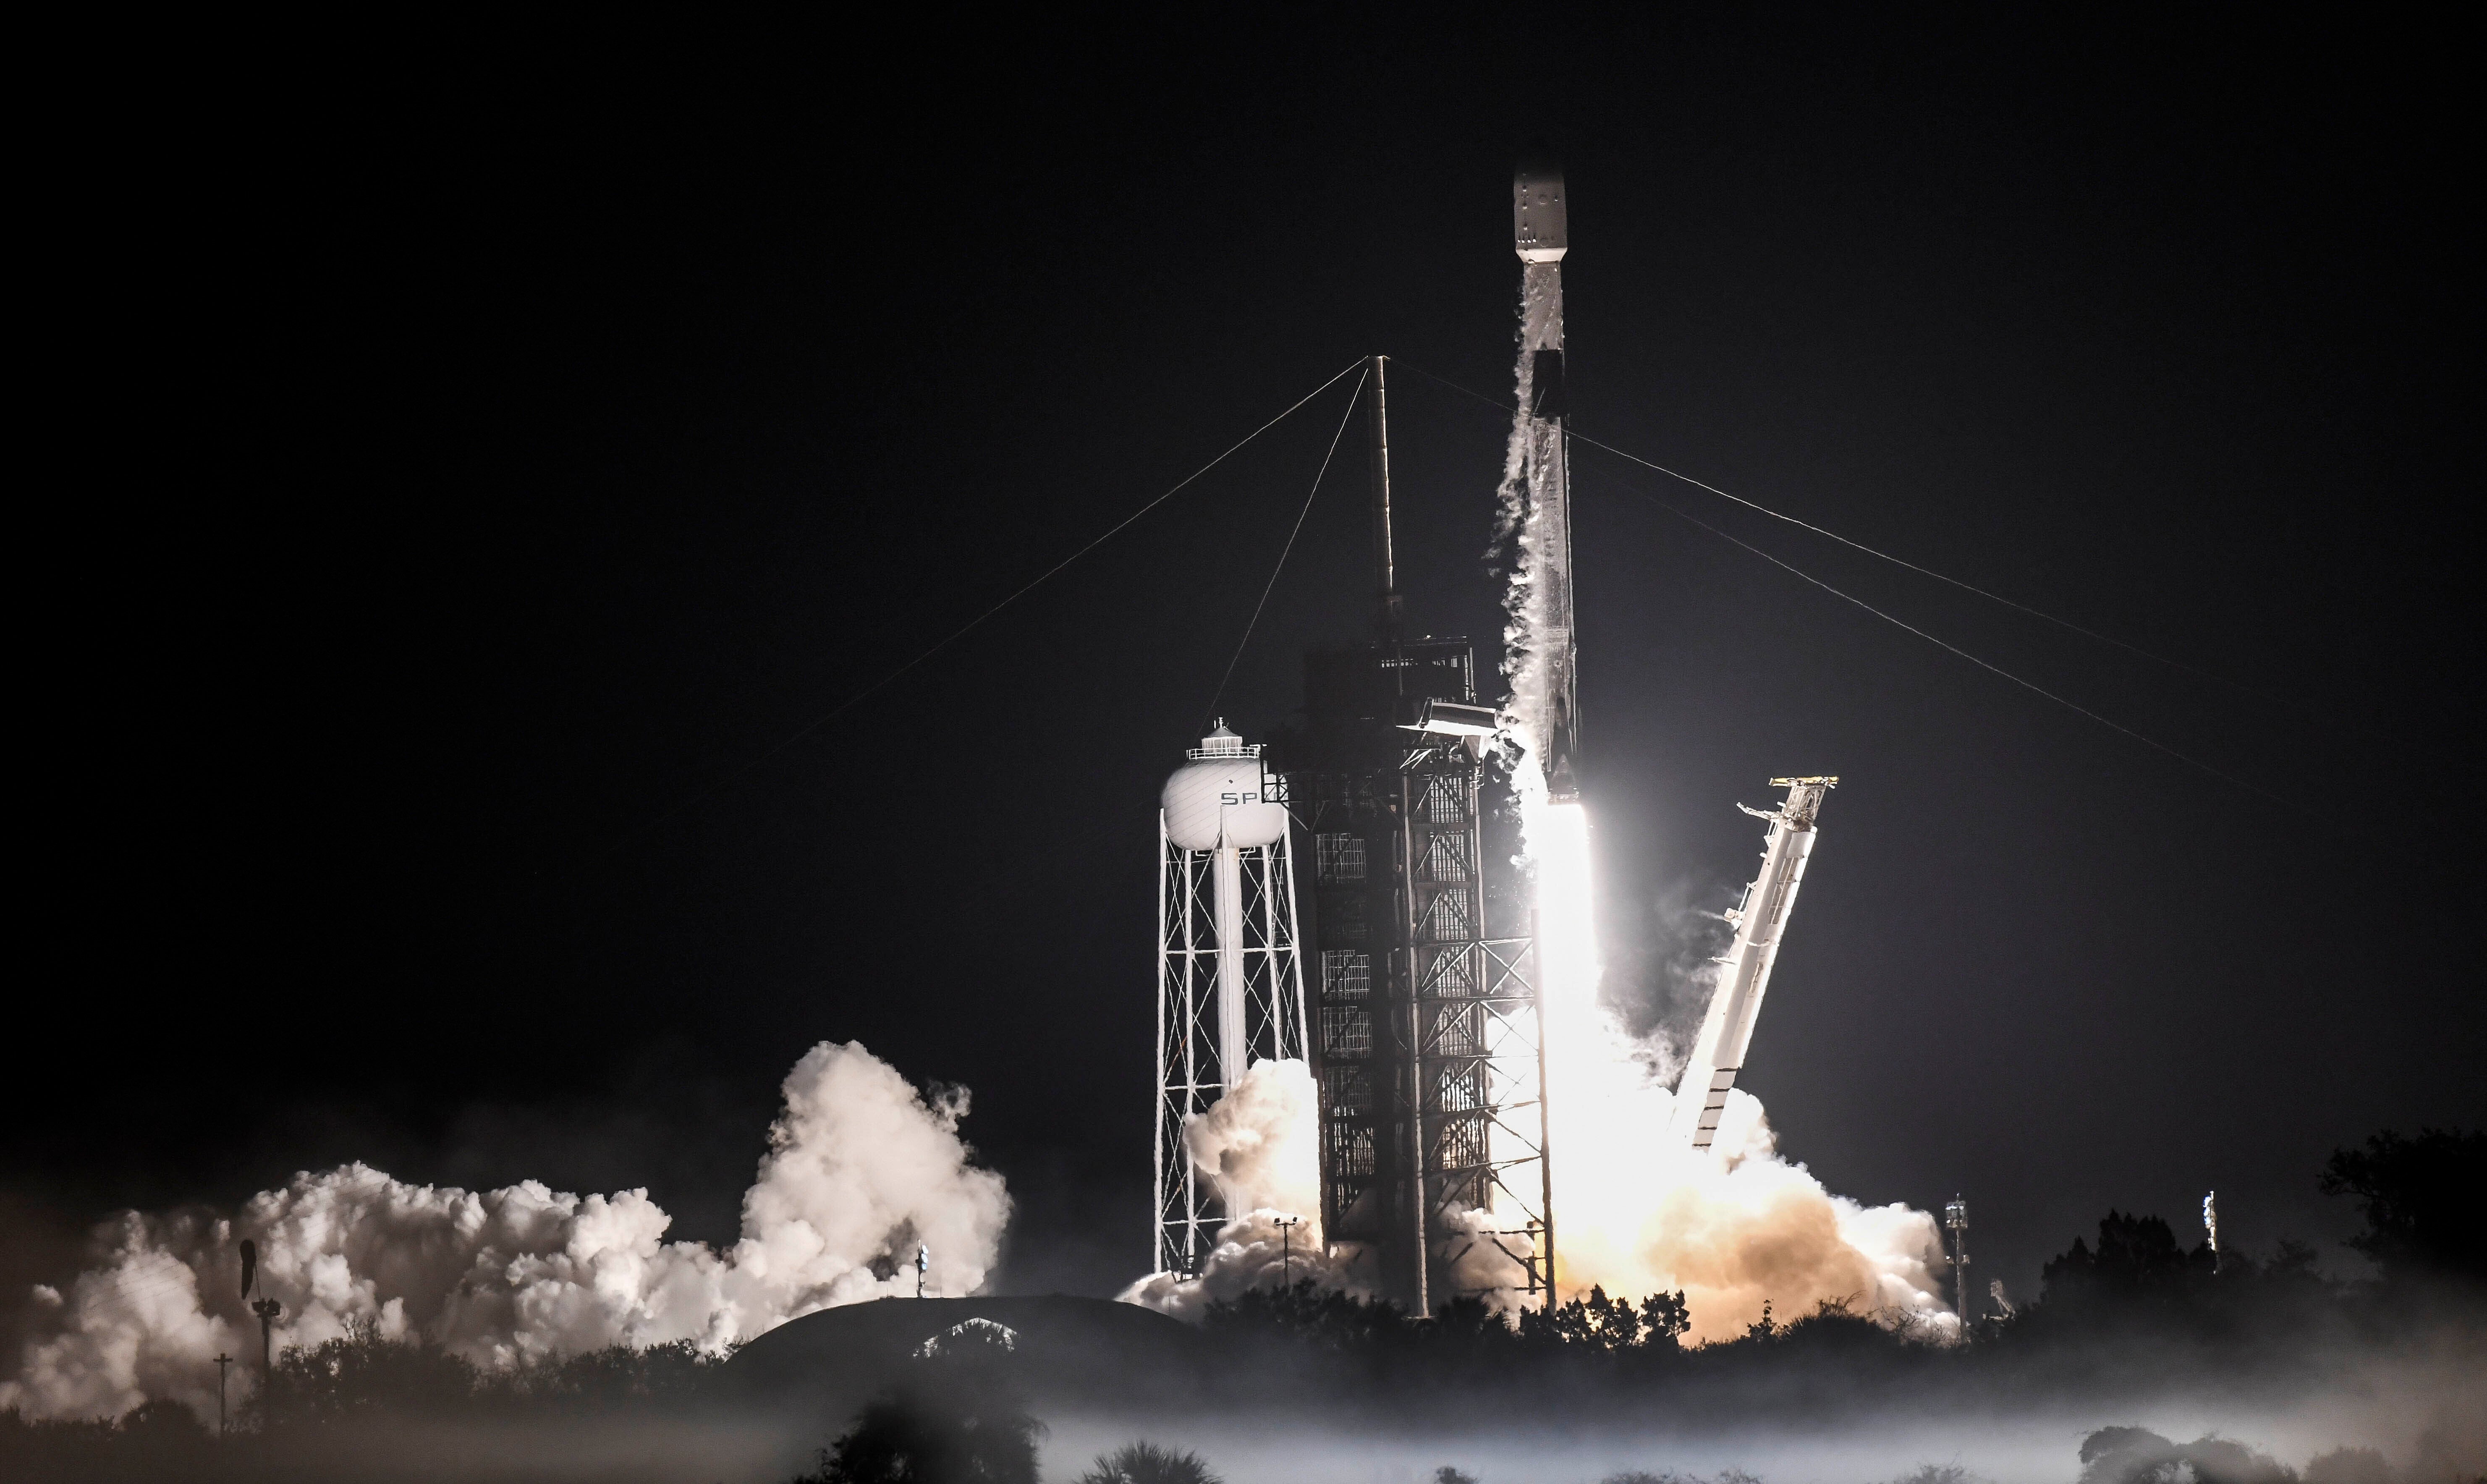 A SpaceX Falcon 9 rocket lifts off from Kennedy Space Center on 14 March, 2021, in Florida.